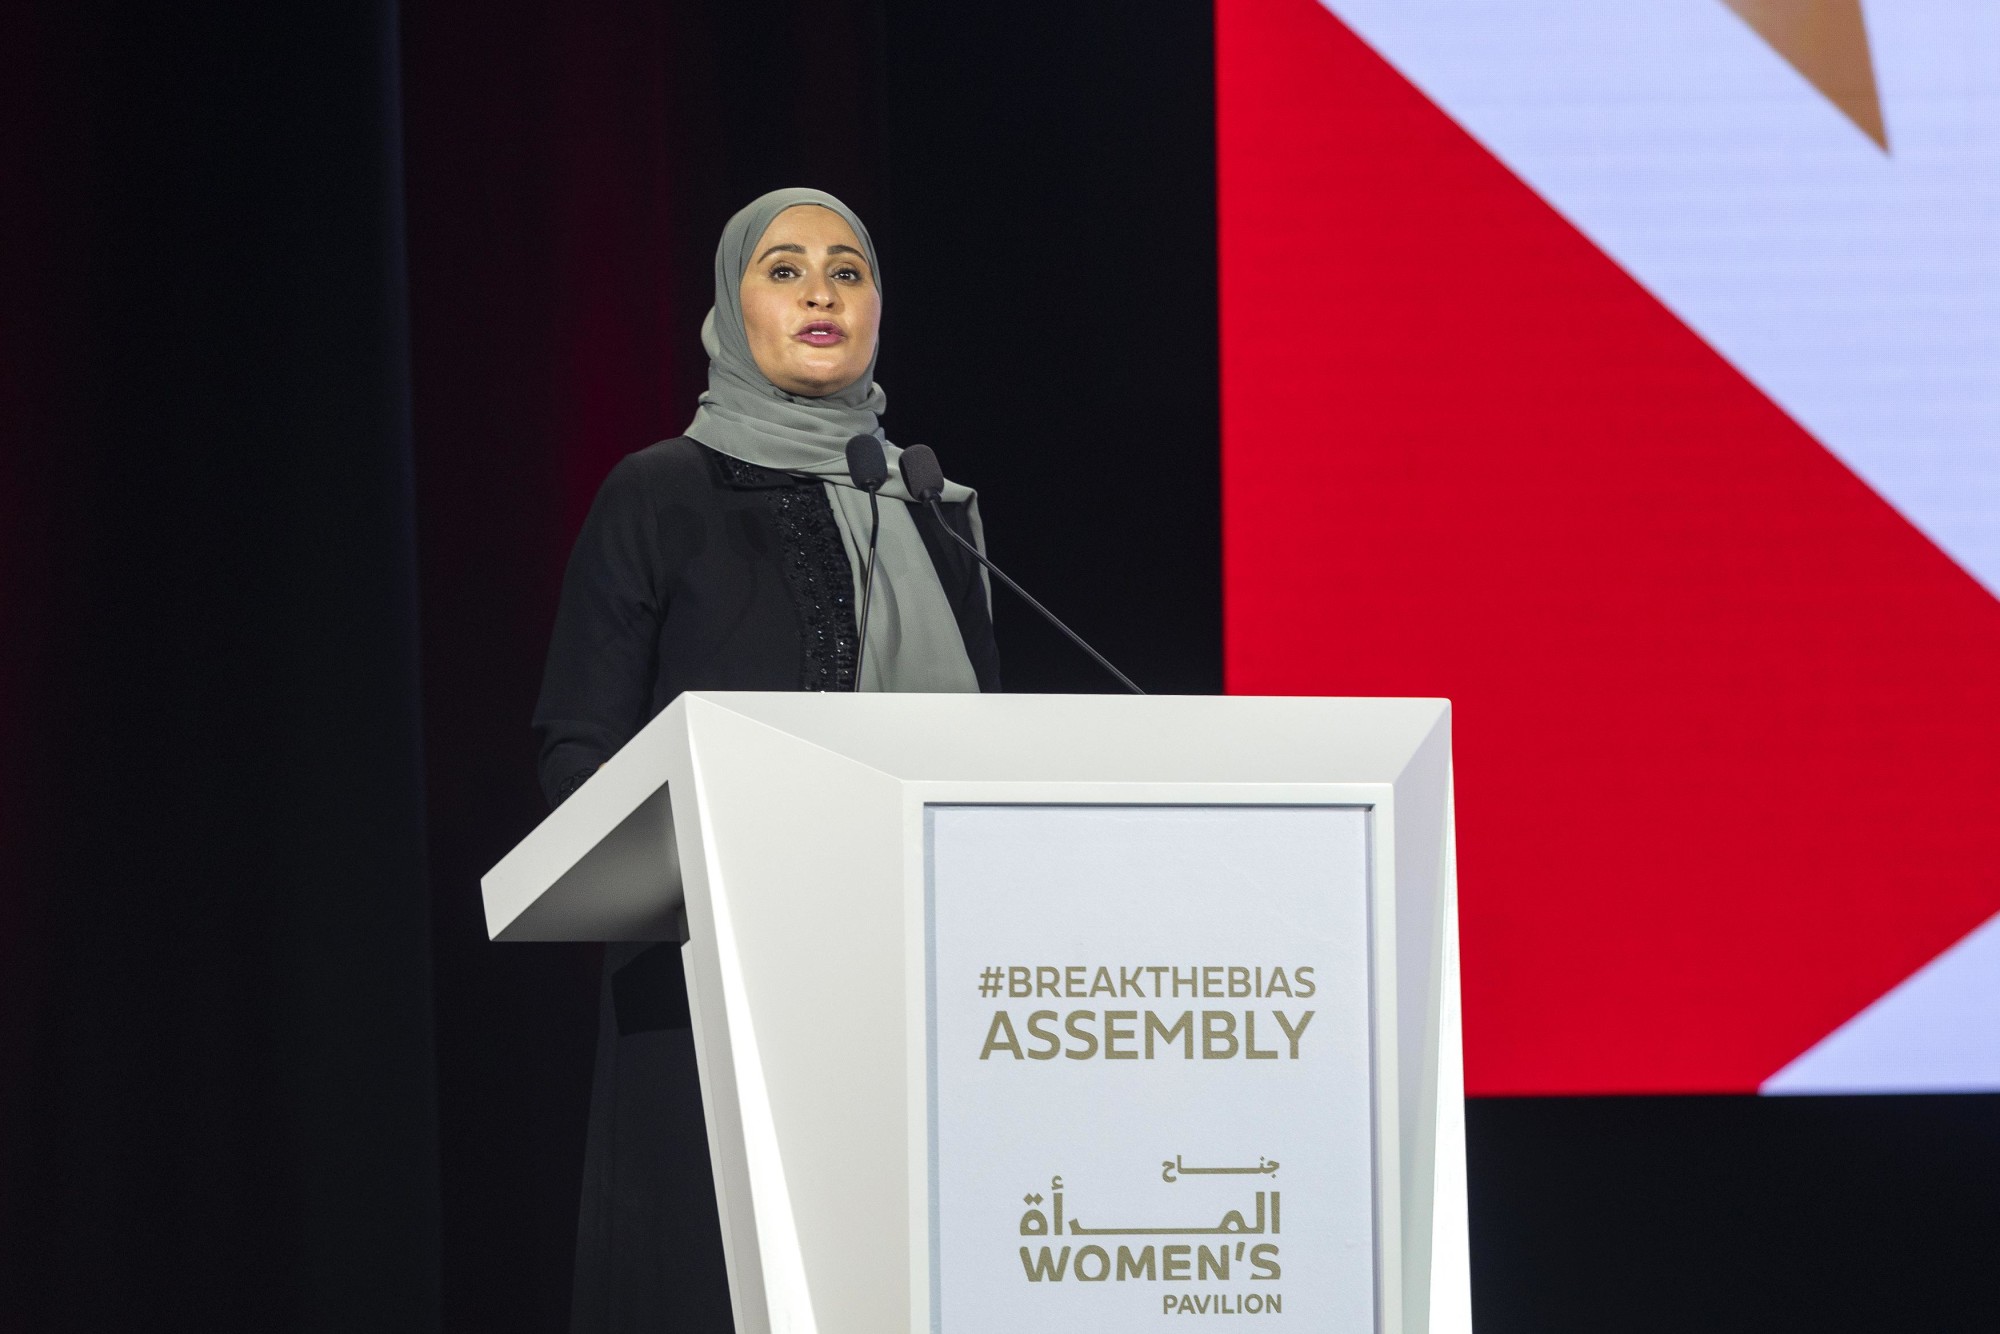 Her Excellency Ohood Al Roumi, Minister of State for Government Development and the Future, UAE speaks during the Breaking the Bias Assembly at Dubai Exhibition Centre m60390